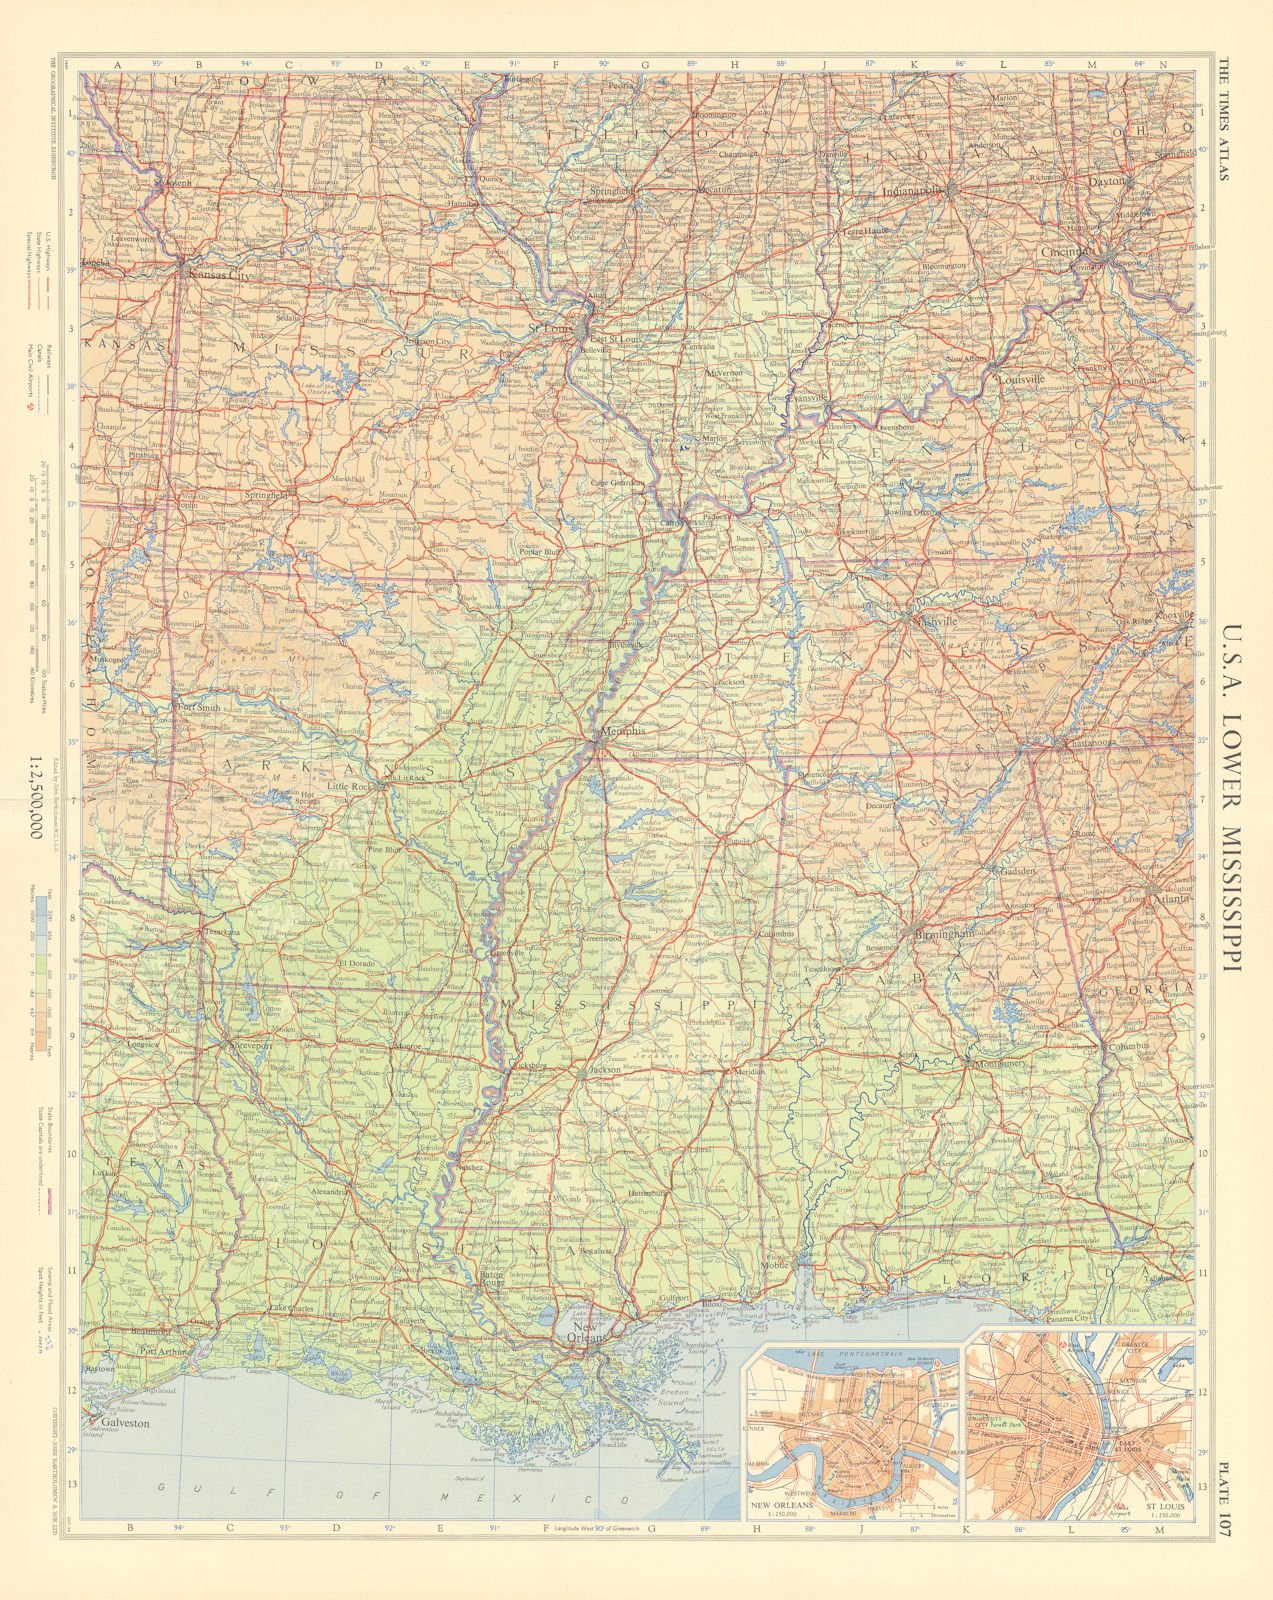 USA Lower Mississipi. New Orleans & St Louis plans. Deep South. TIMES 1957 map